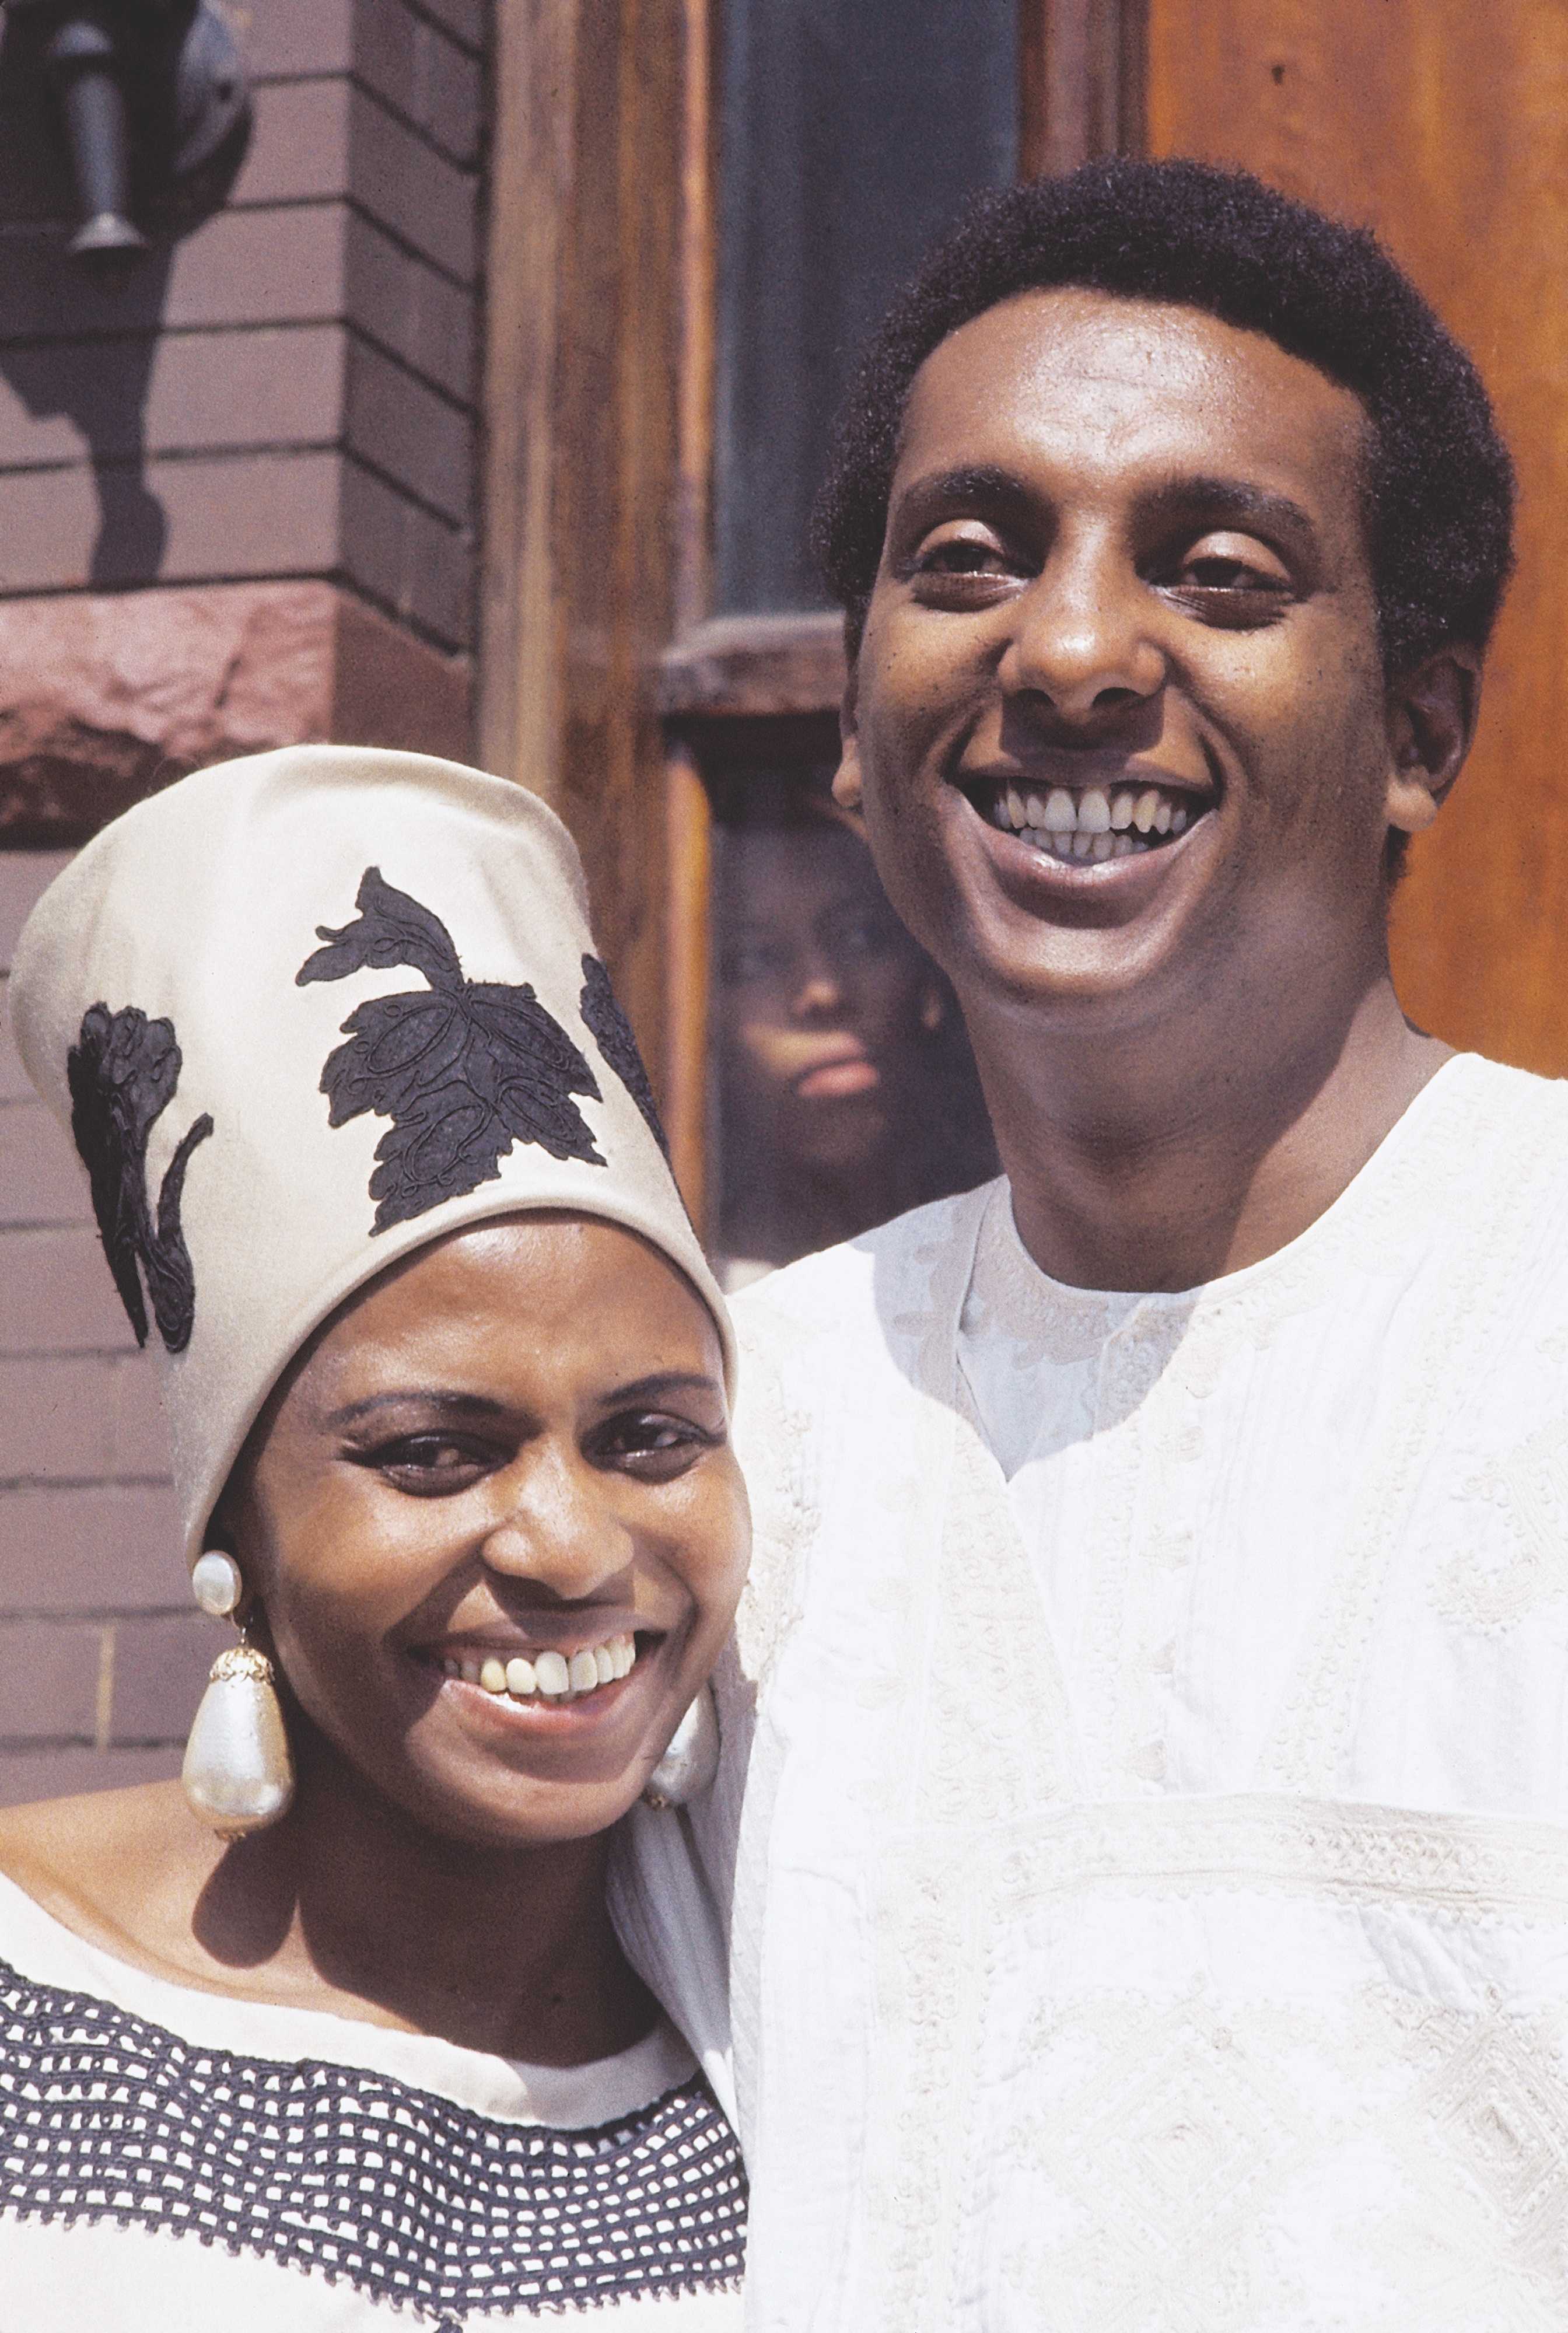 Photograph of Miriam Makeba and Black Panther Party leader Stokely Carmichael